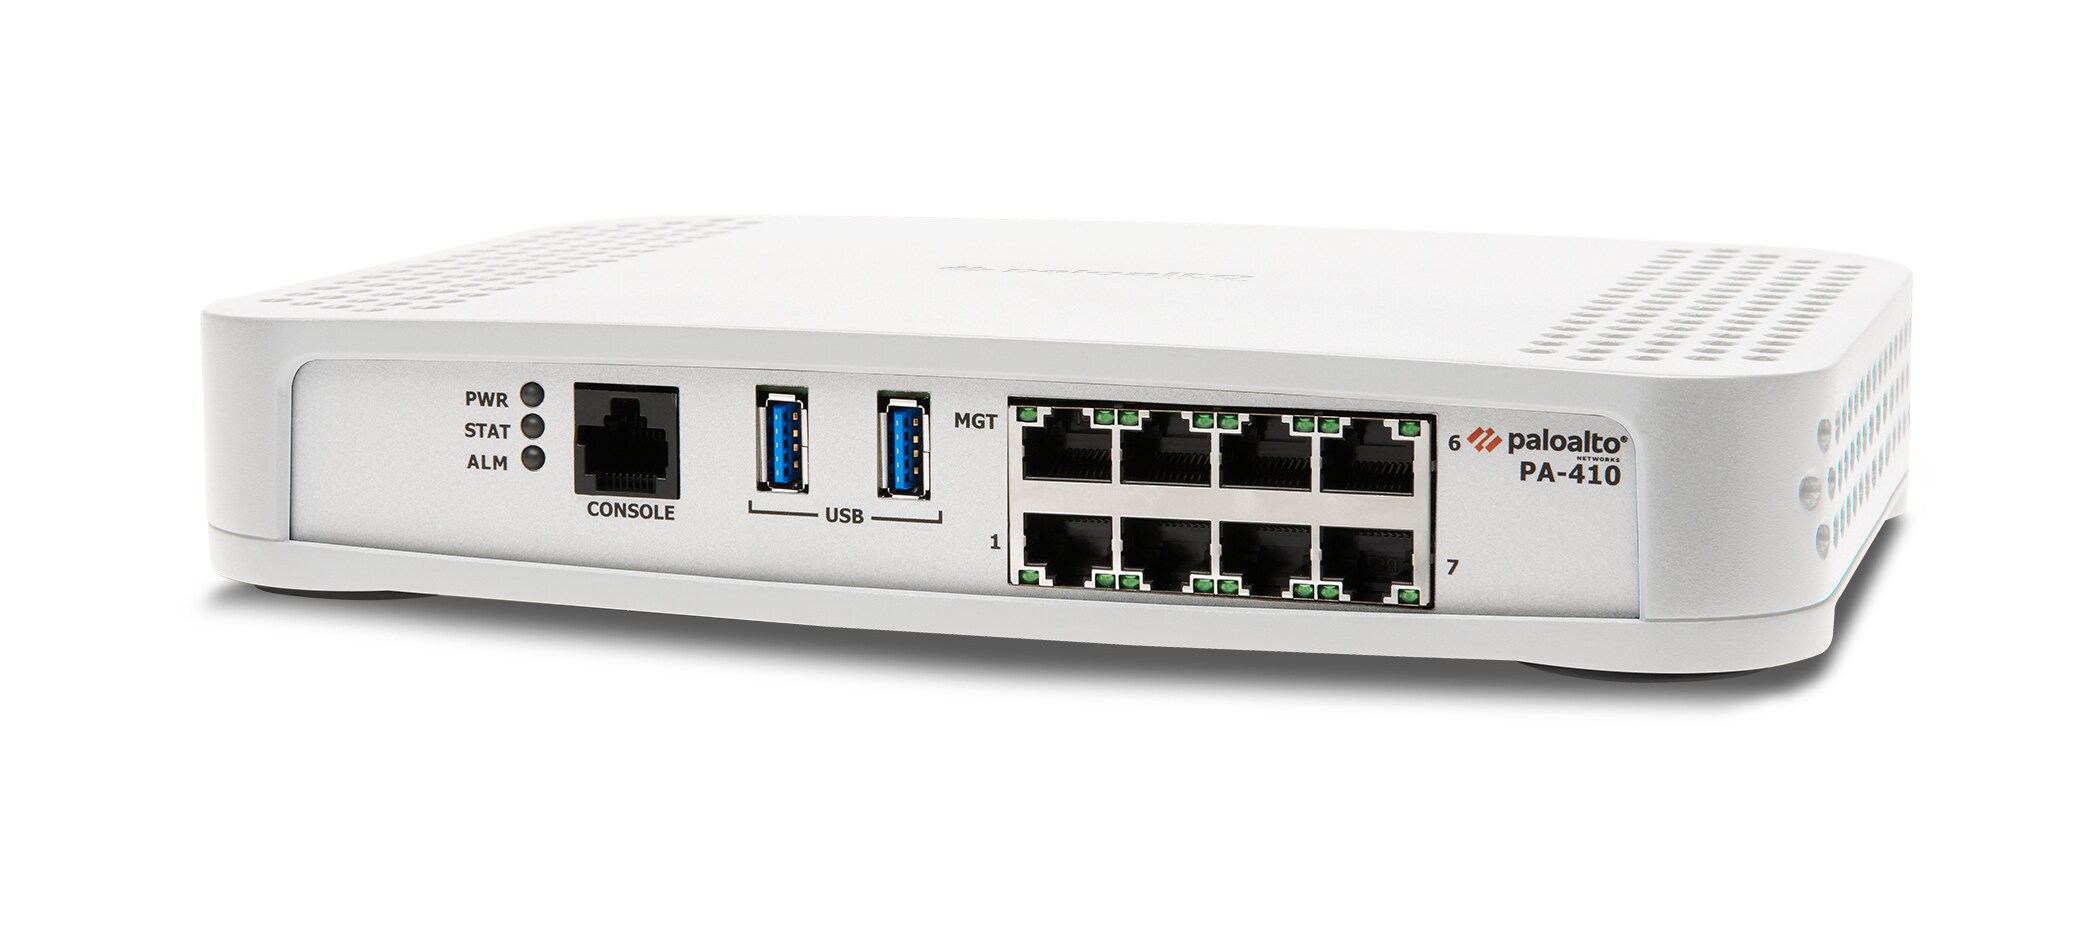 Five Things to Know about PA-400 Series Next-Generation Firewalls